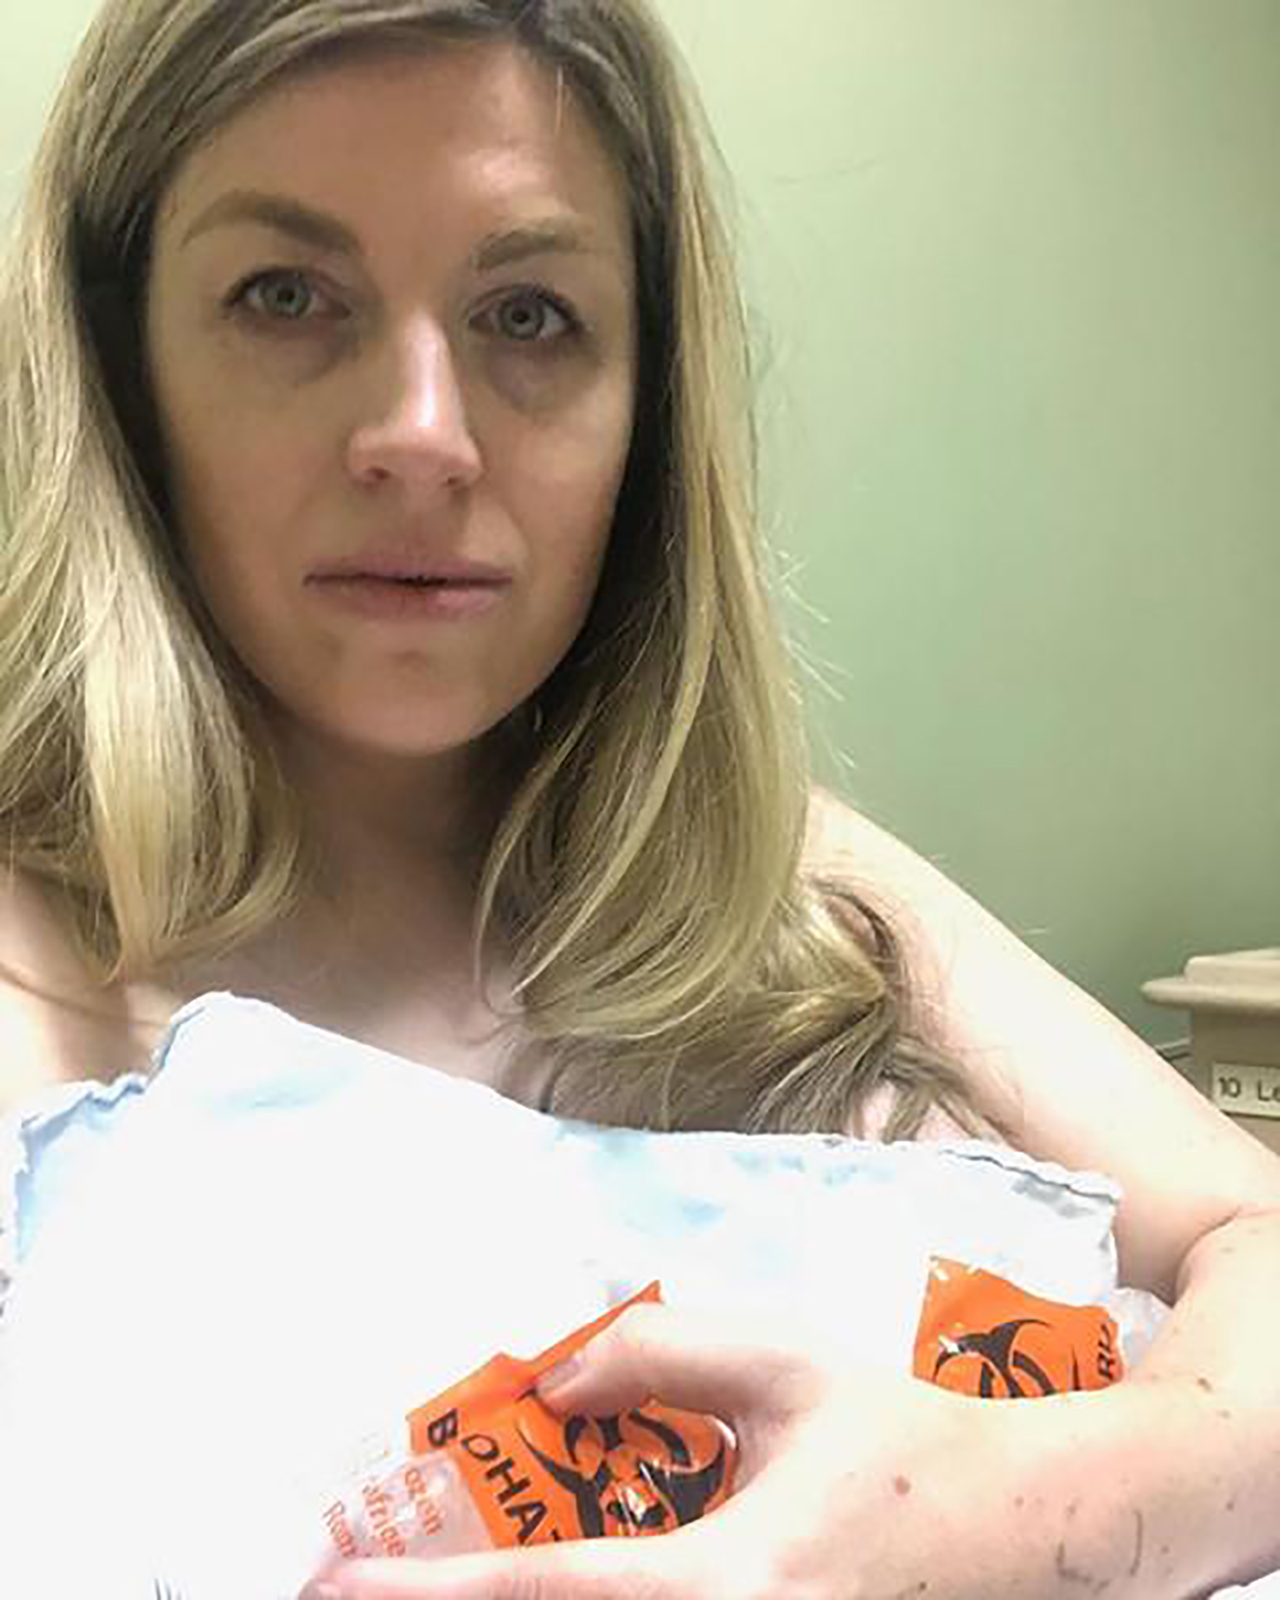 A woman in the hospital looks at the camera after giving birth and holds ice packs on her breasts